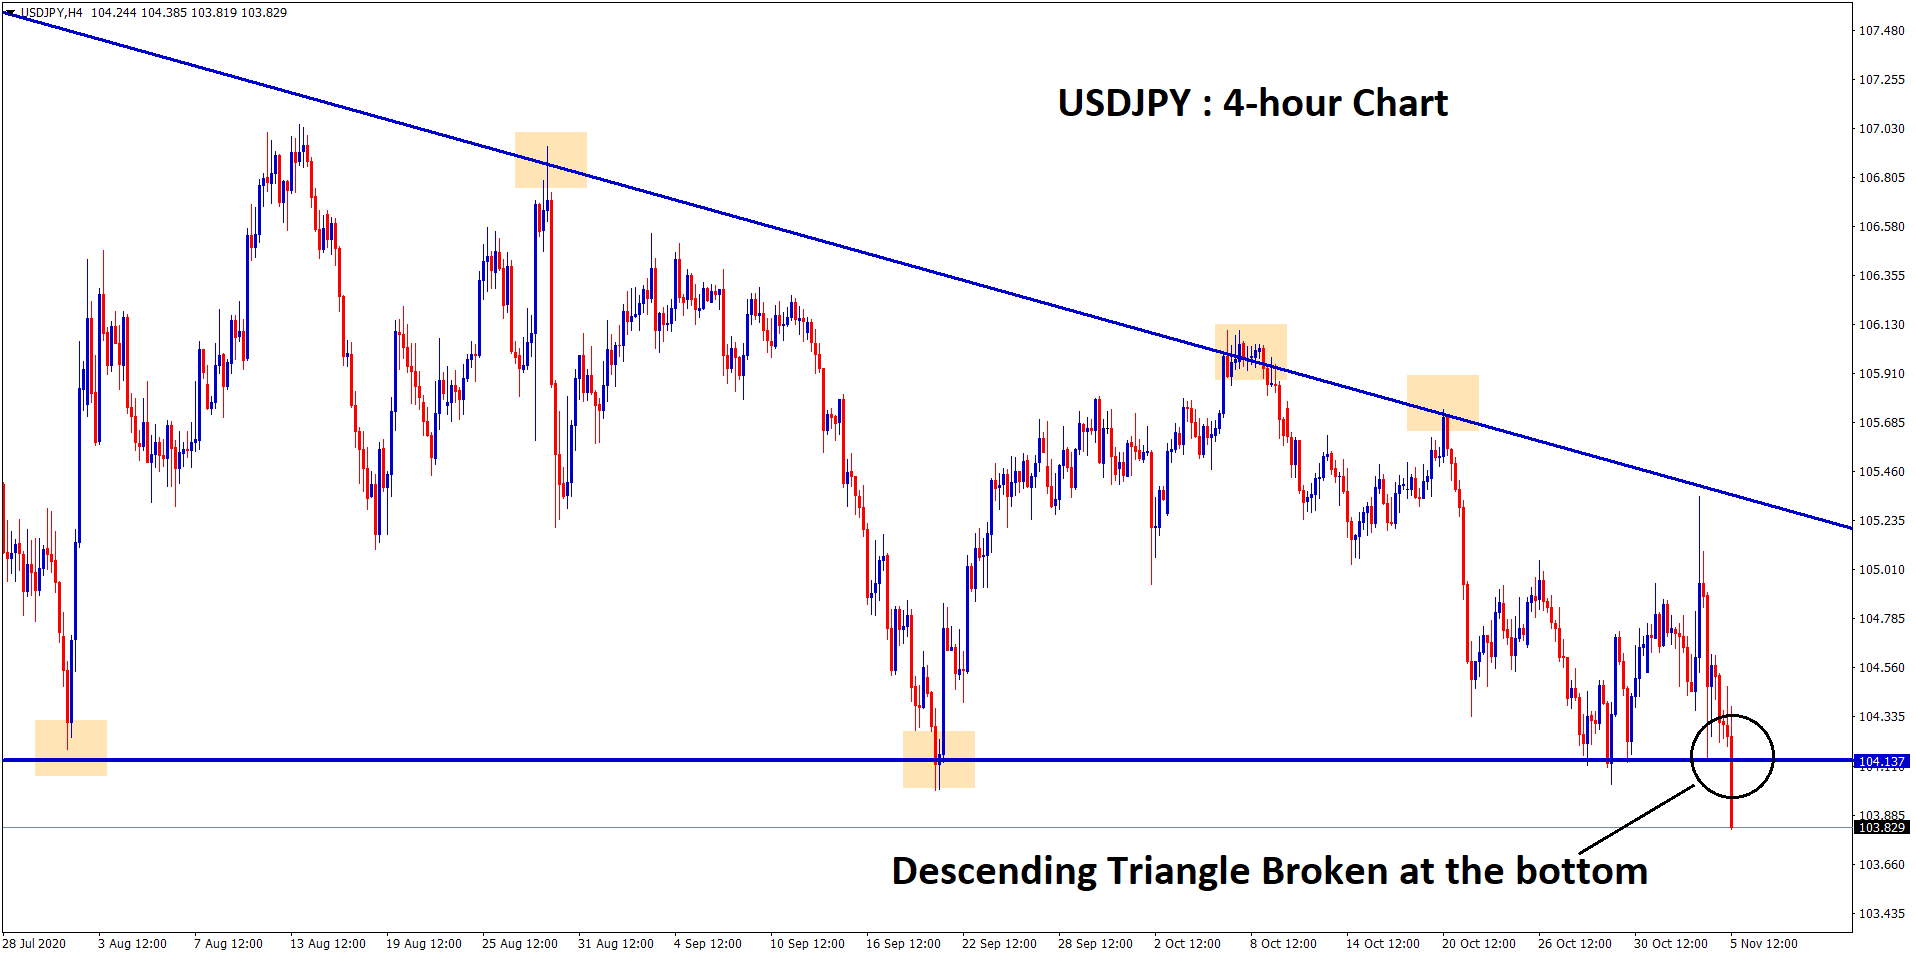 +500 Points USDJPY reached after descending Triangle breakout FOREX GDP